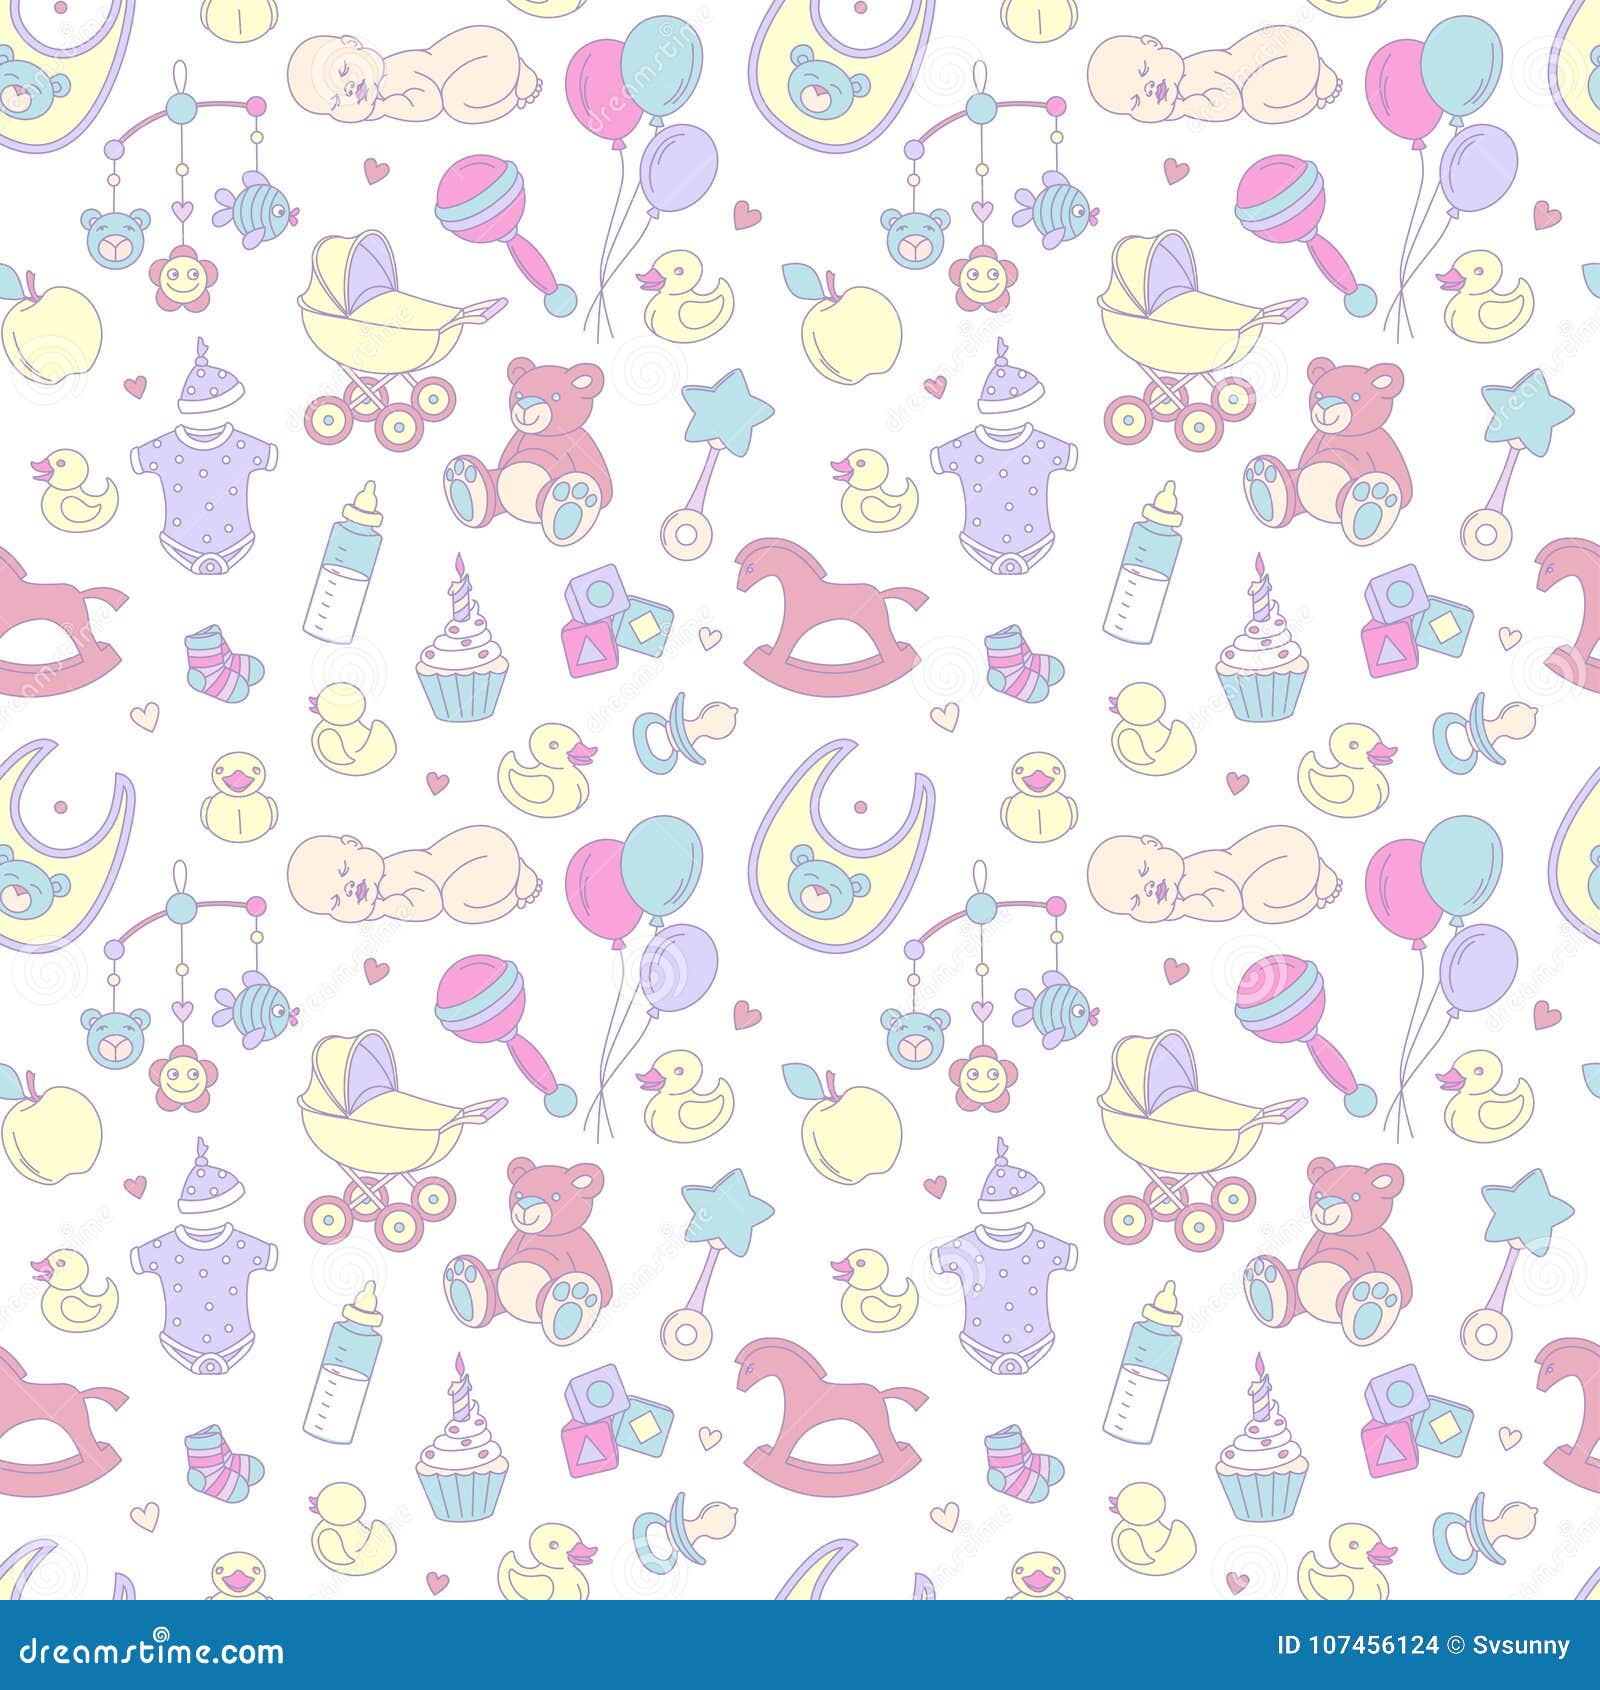 Girl Watercolor Babies Baby Shower Wrapping Paper, Zazzle